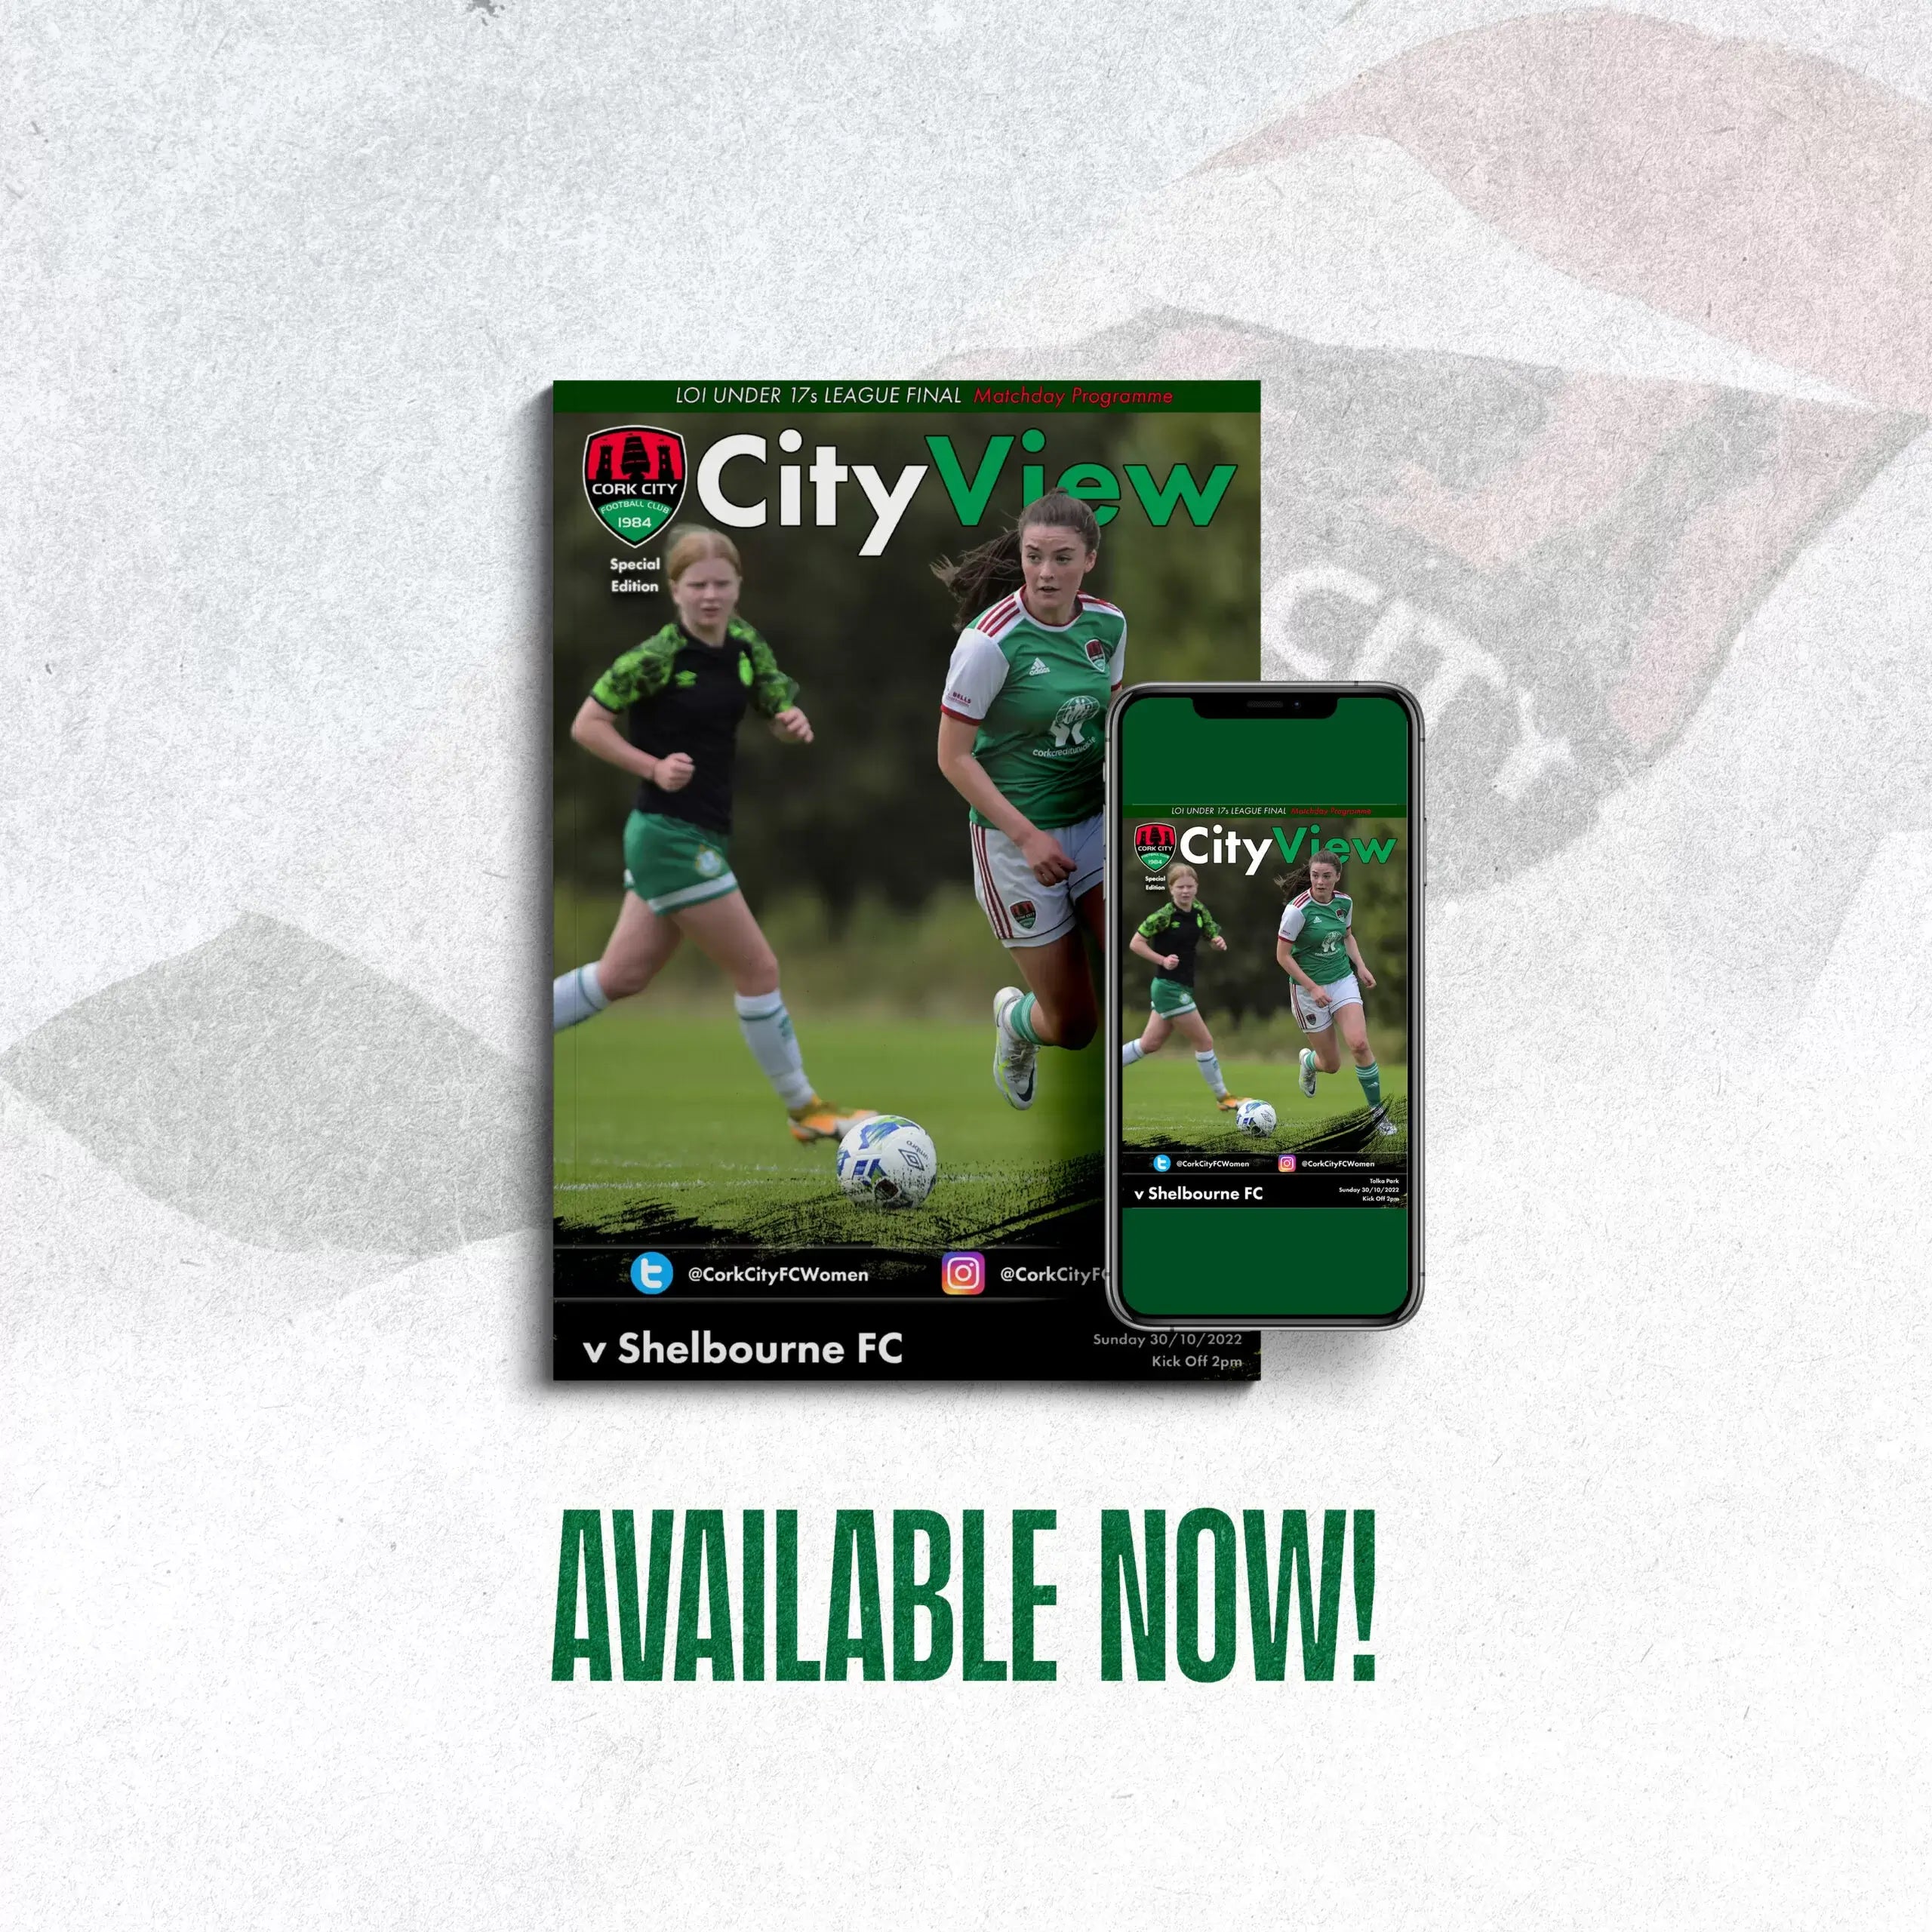 WU17: City View League Final Edition Available Now